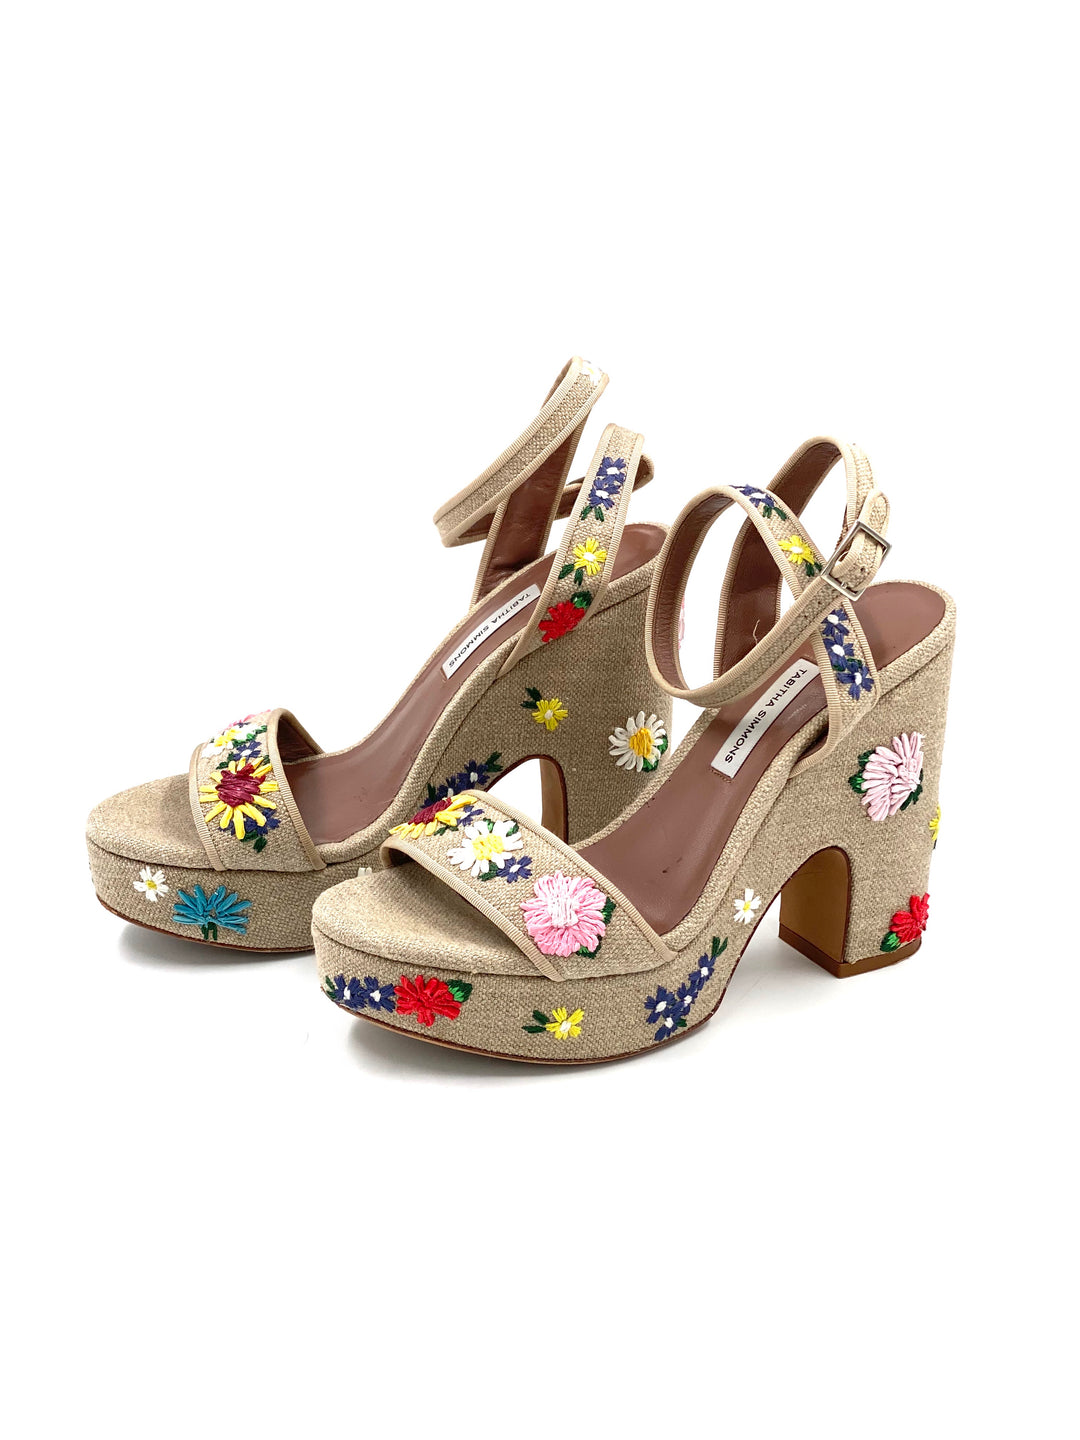 Tabitha Simmons Calla Meadow Embroidered Sandals